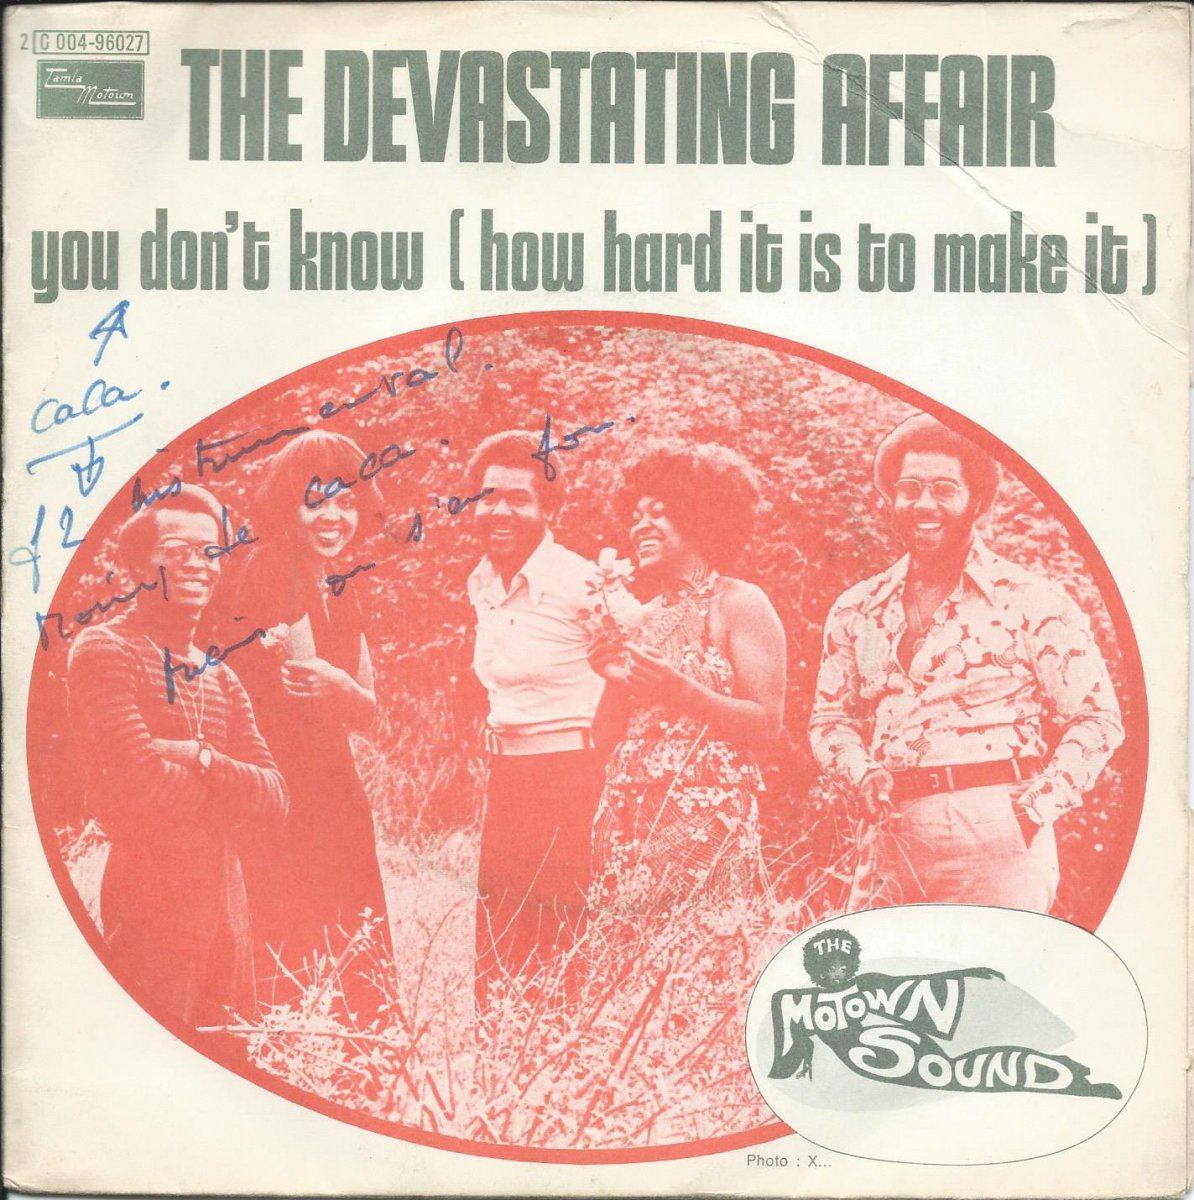 THE DEVASTATING AFFAIR ‎/ YOU DON'T KNOW HOW (HOW HARD IT IS TO MAKE IT) (7